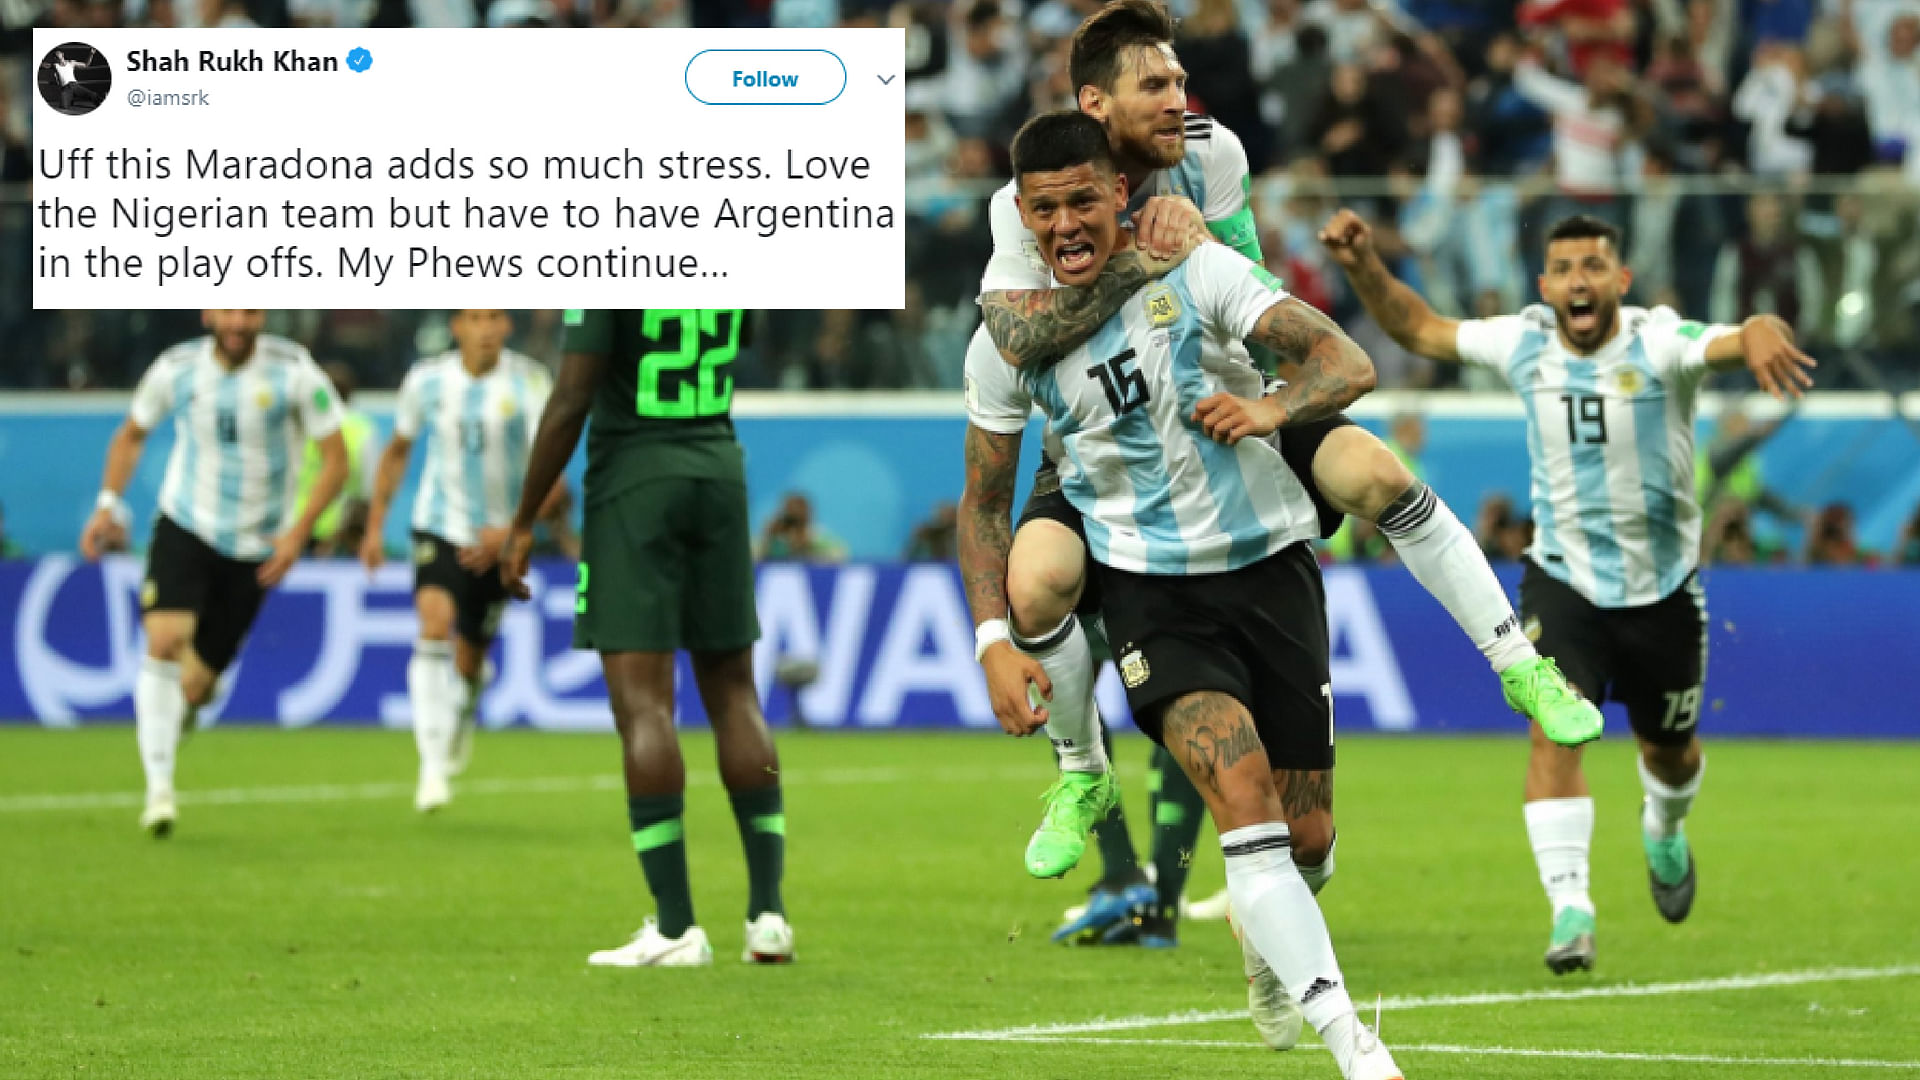 Lionel Messi and Marcos Rojo carried Argentina to the Round of 16 with their goals - and Bollywood was all for it